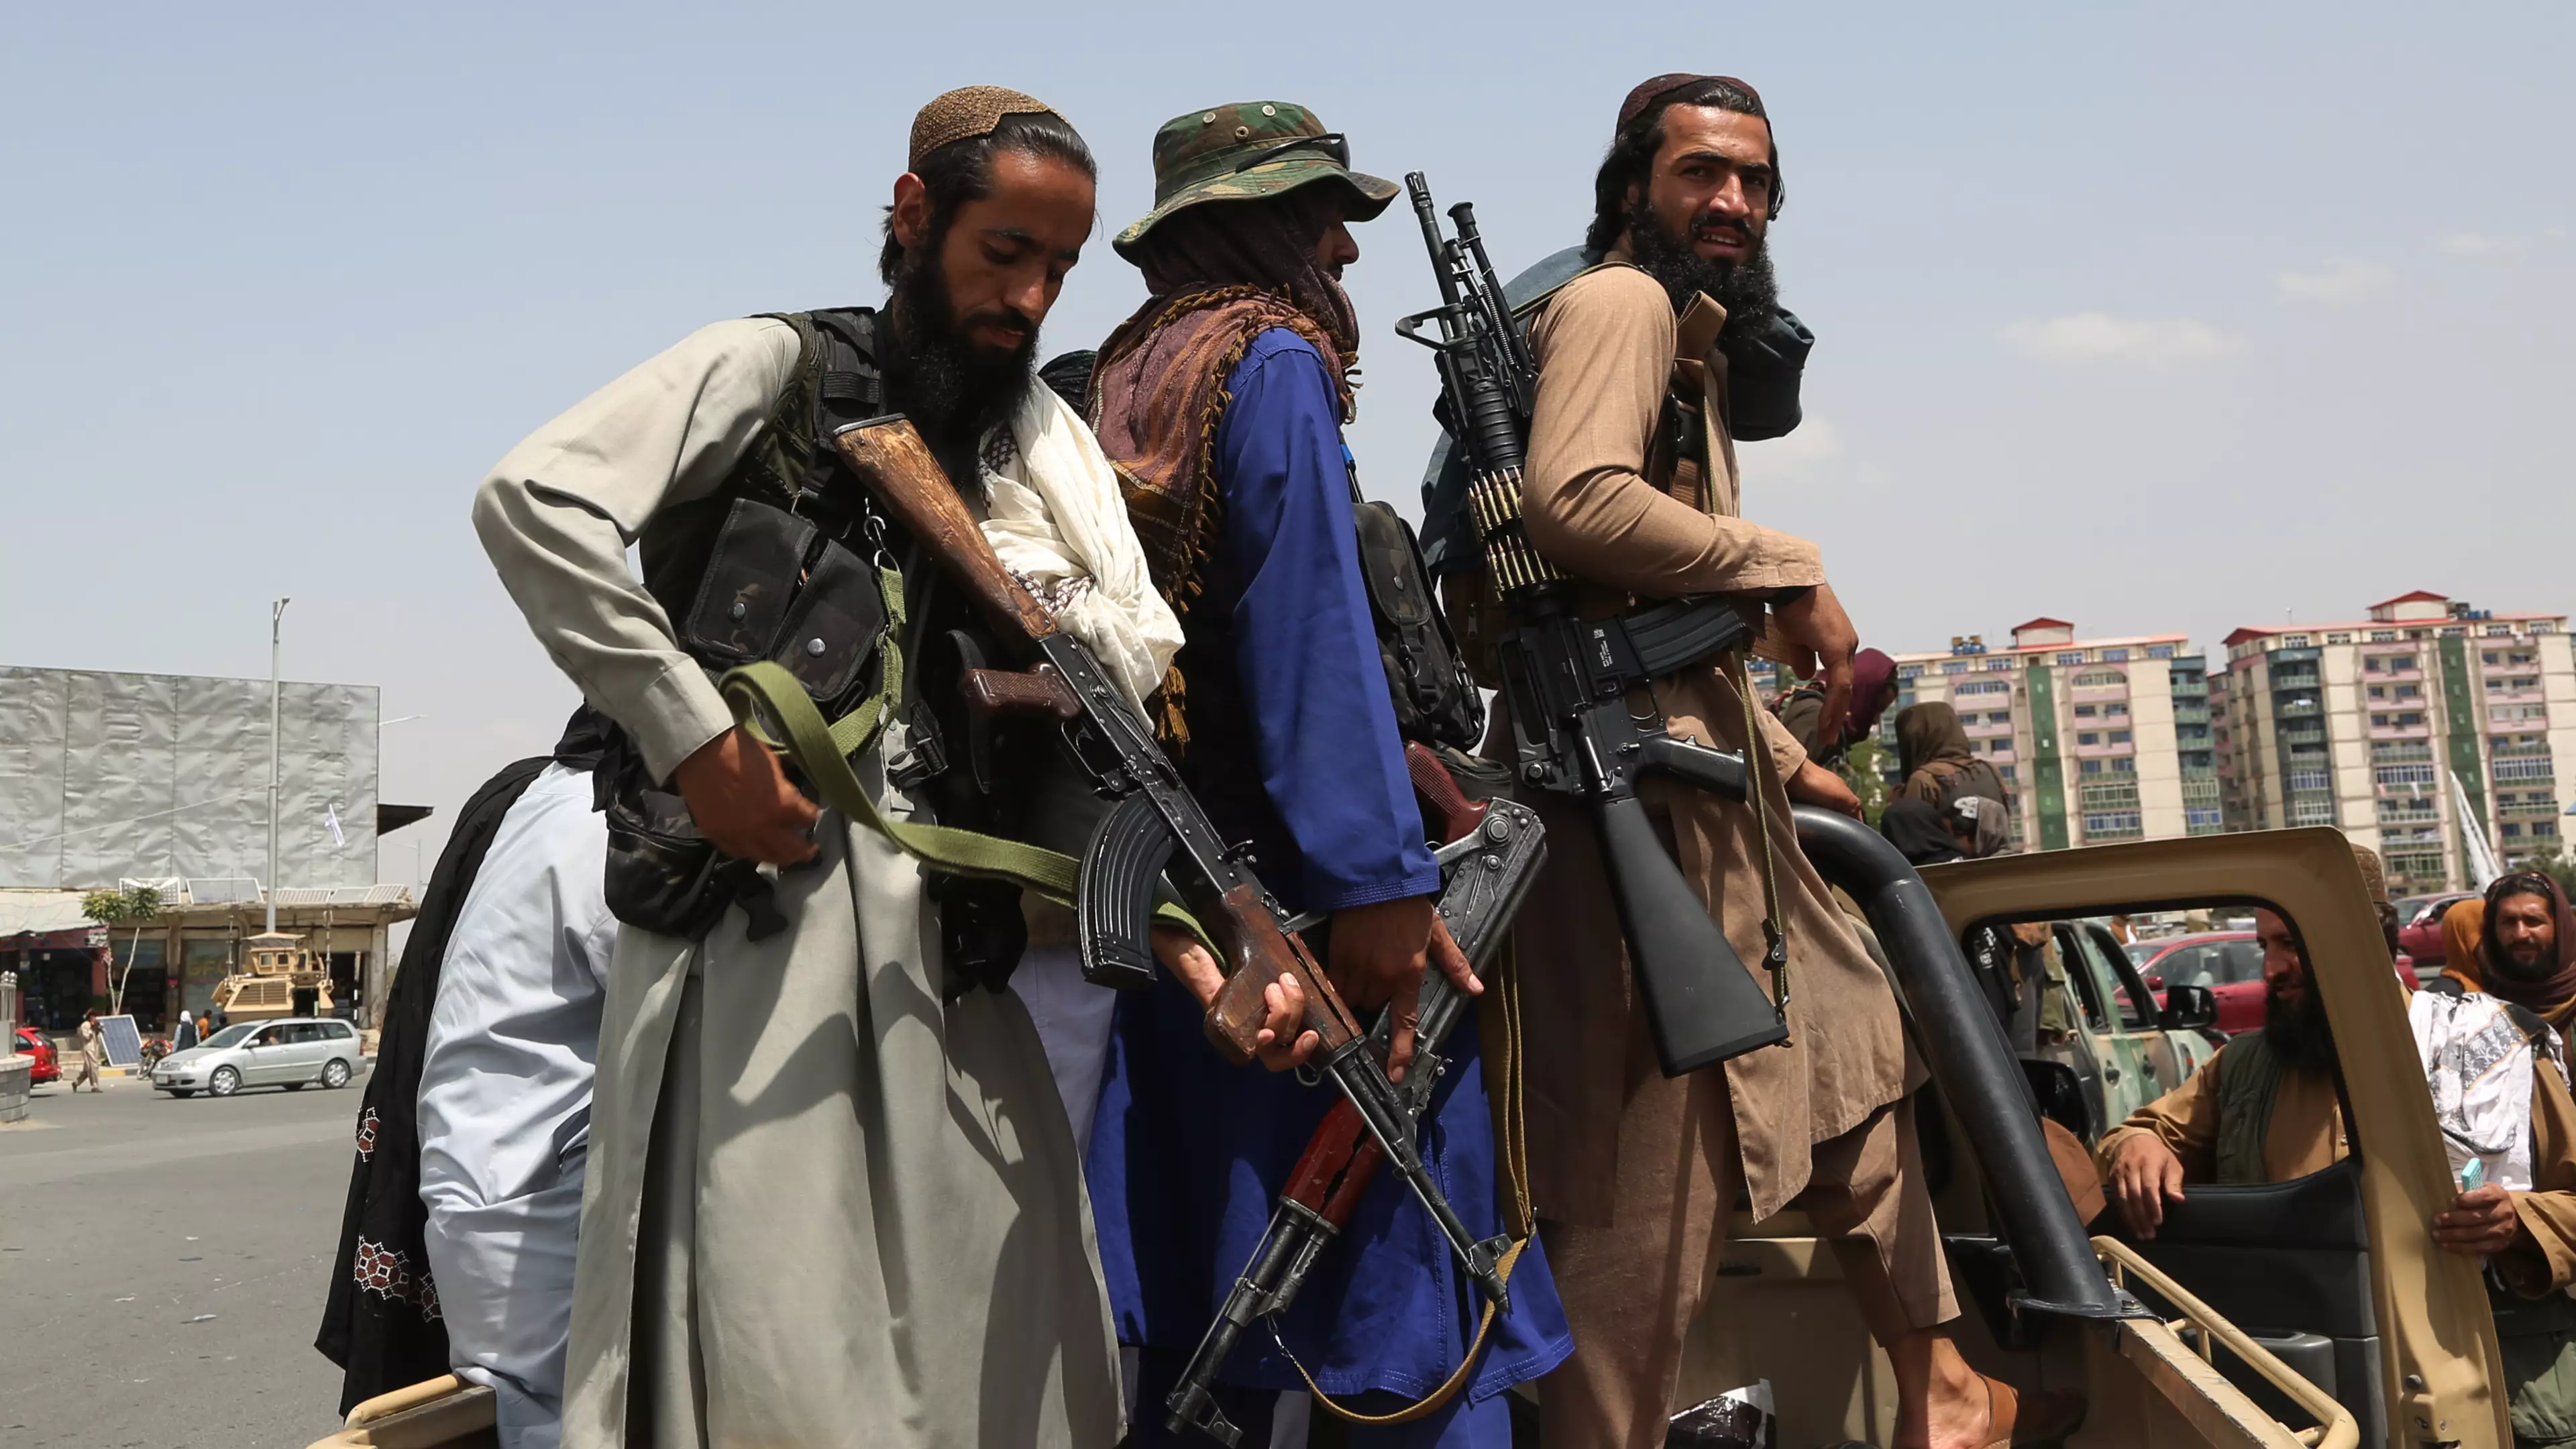 The UK Will Welcome 25,000 Refugees Following The Taliban's Takeover In Afghanistan